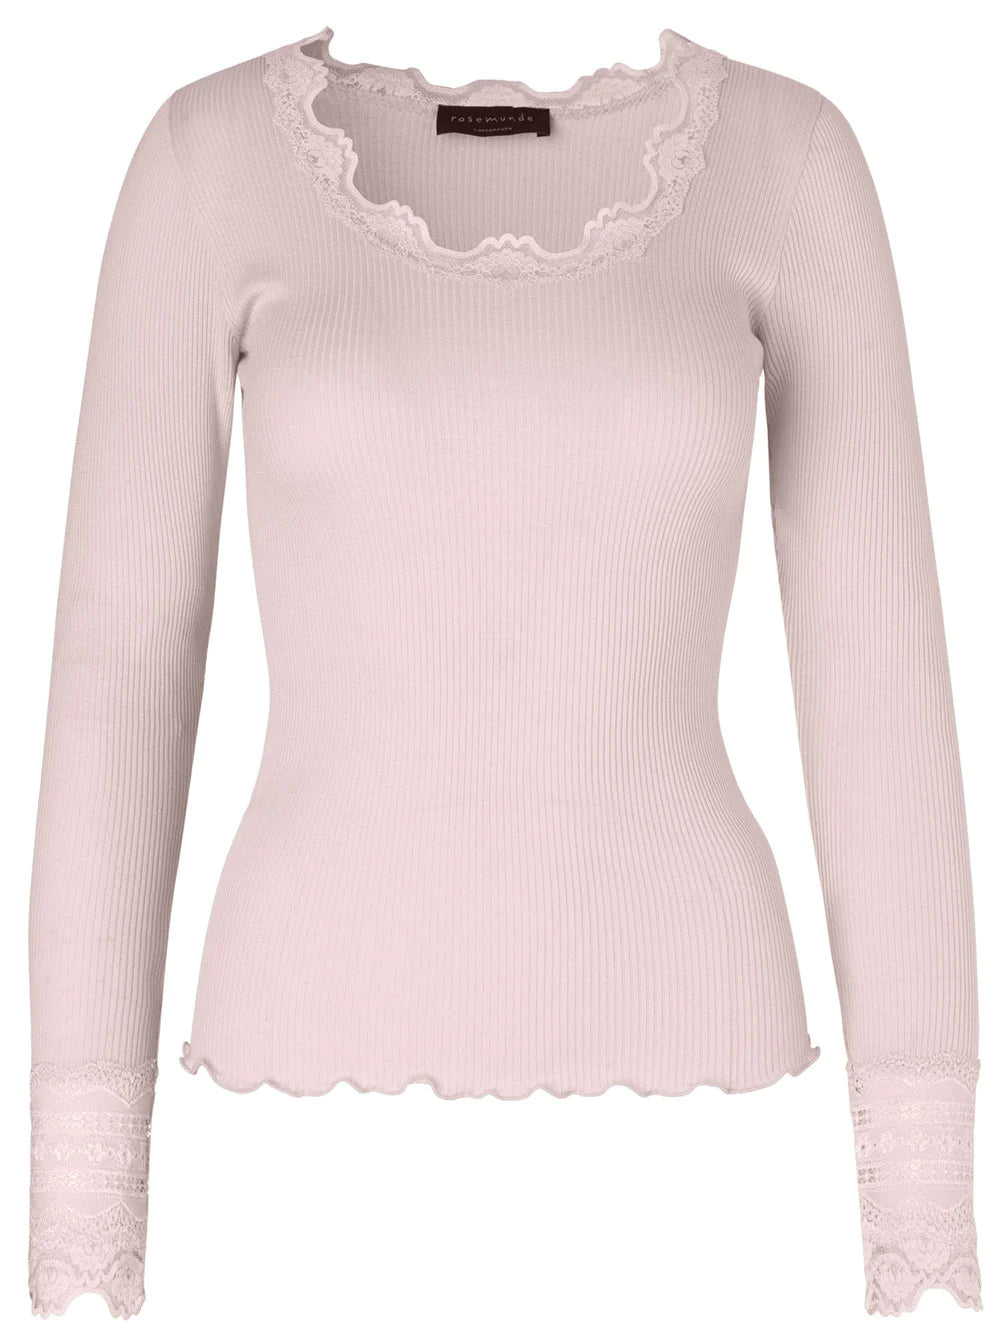 A beautifully designed Rosemunde women's pink Long-Sleeve Silk Lace Top with lace detailing.